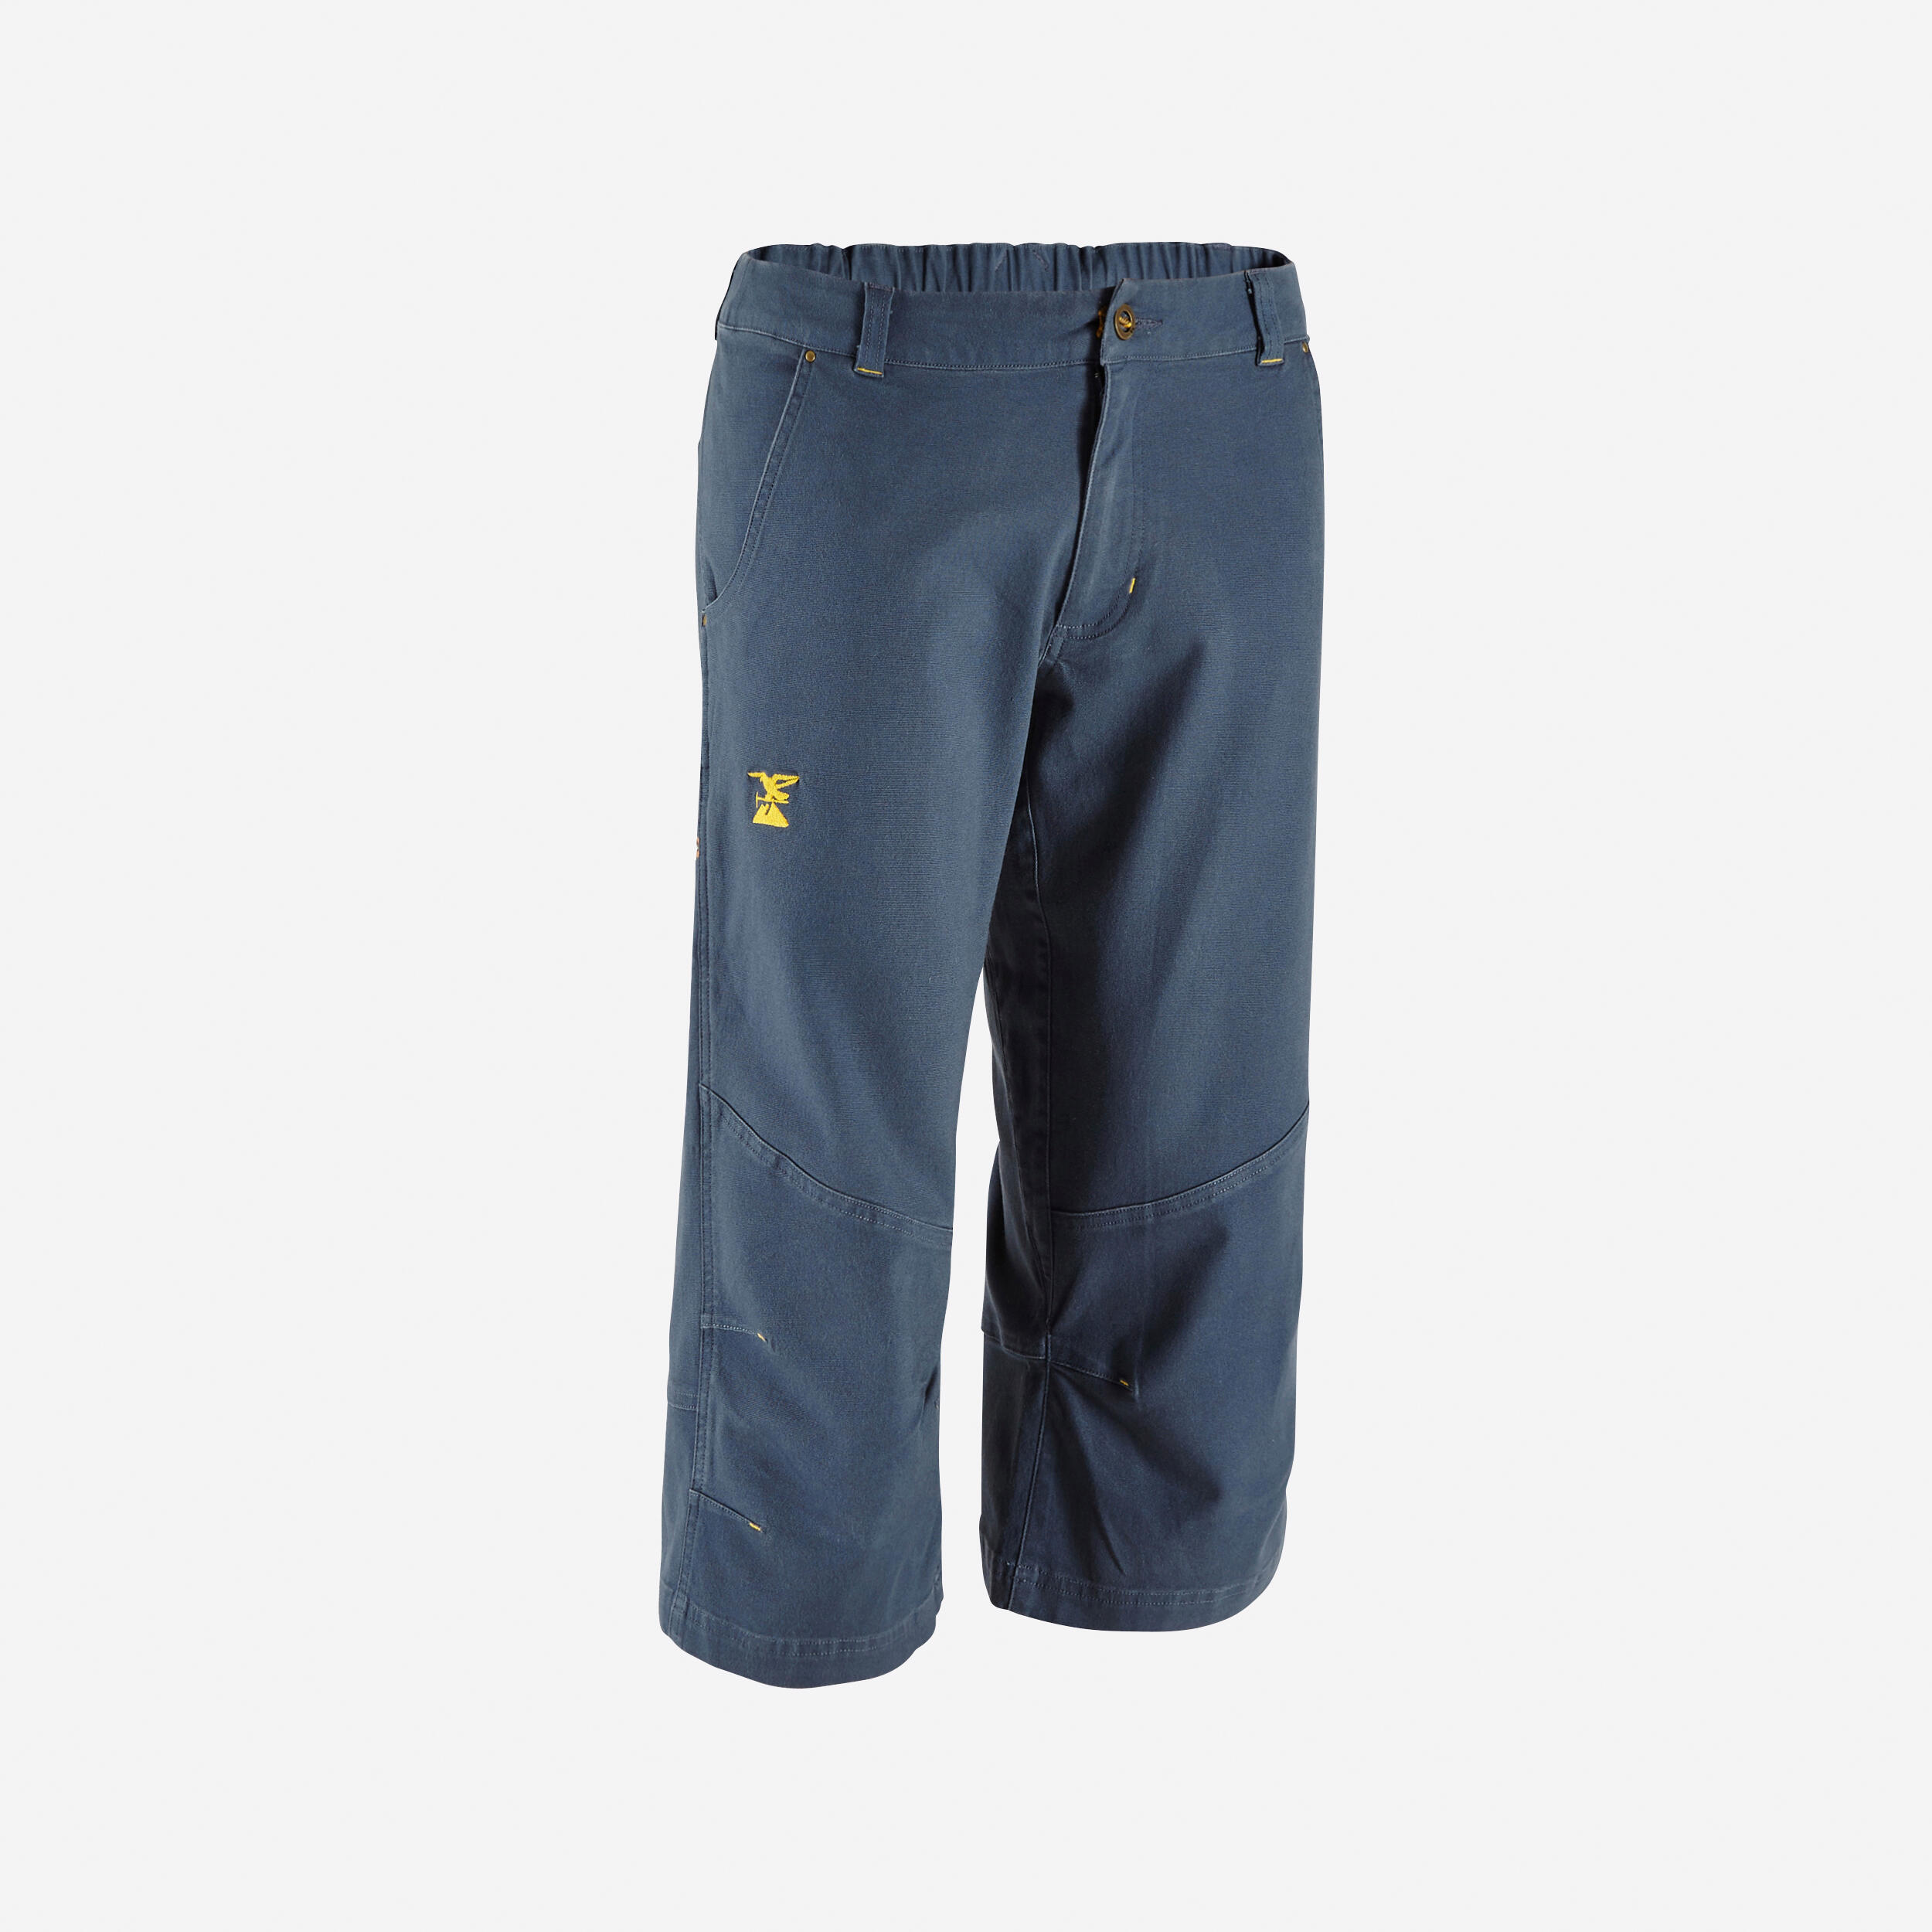 La Sportiva Roots Pant Men's Climbing Trousers | Absolute-Snow